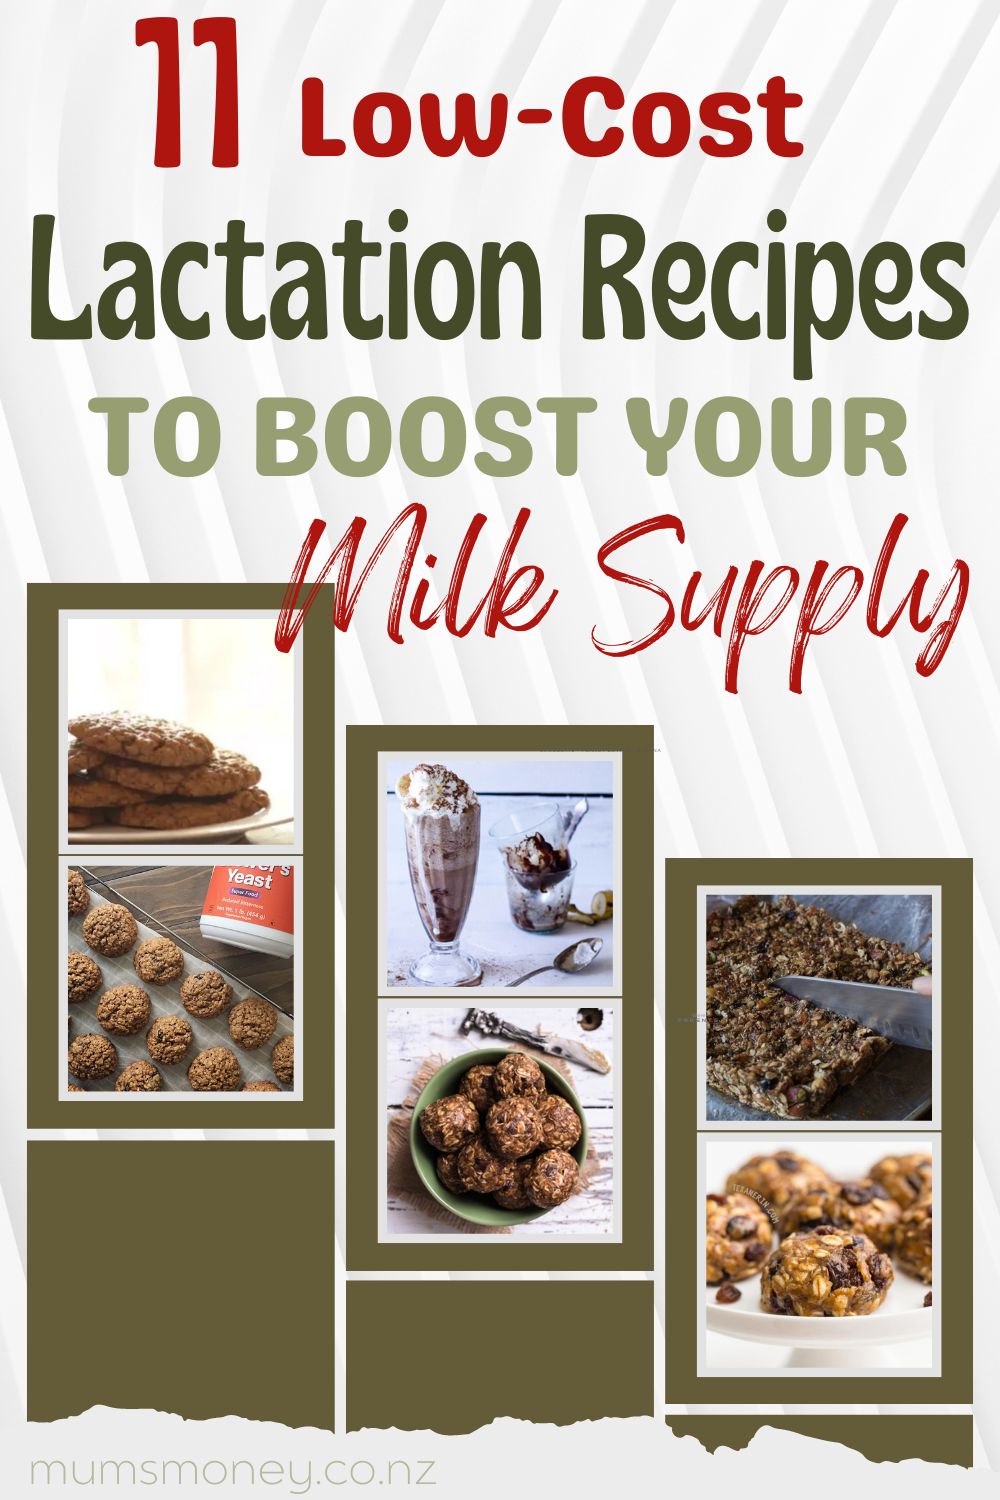 Low-Cost Lactation Recipes To Boost Your Milk Supply Pin Image